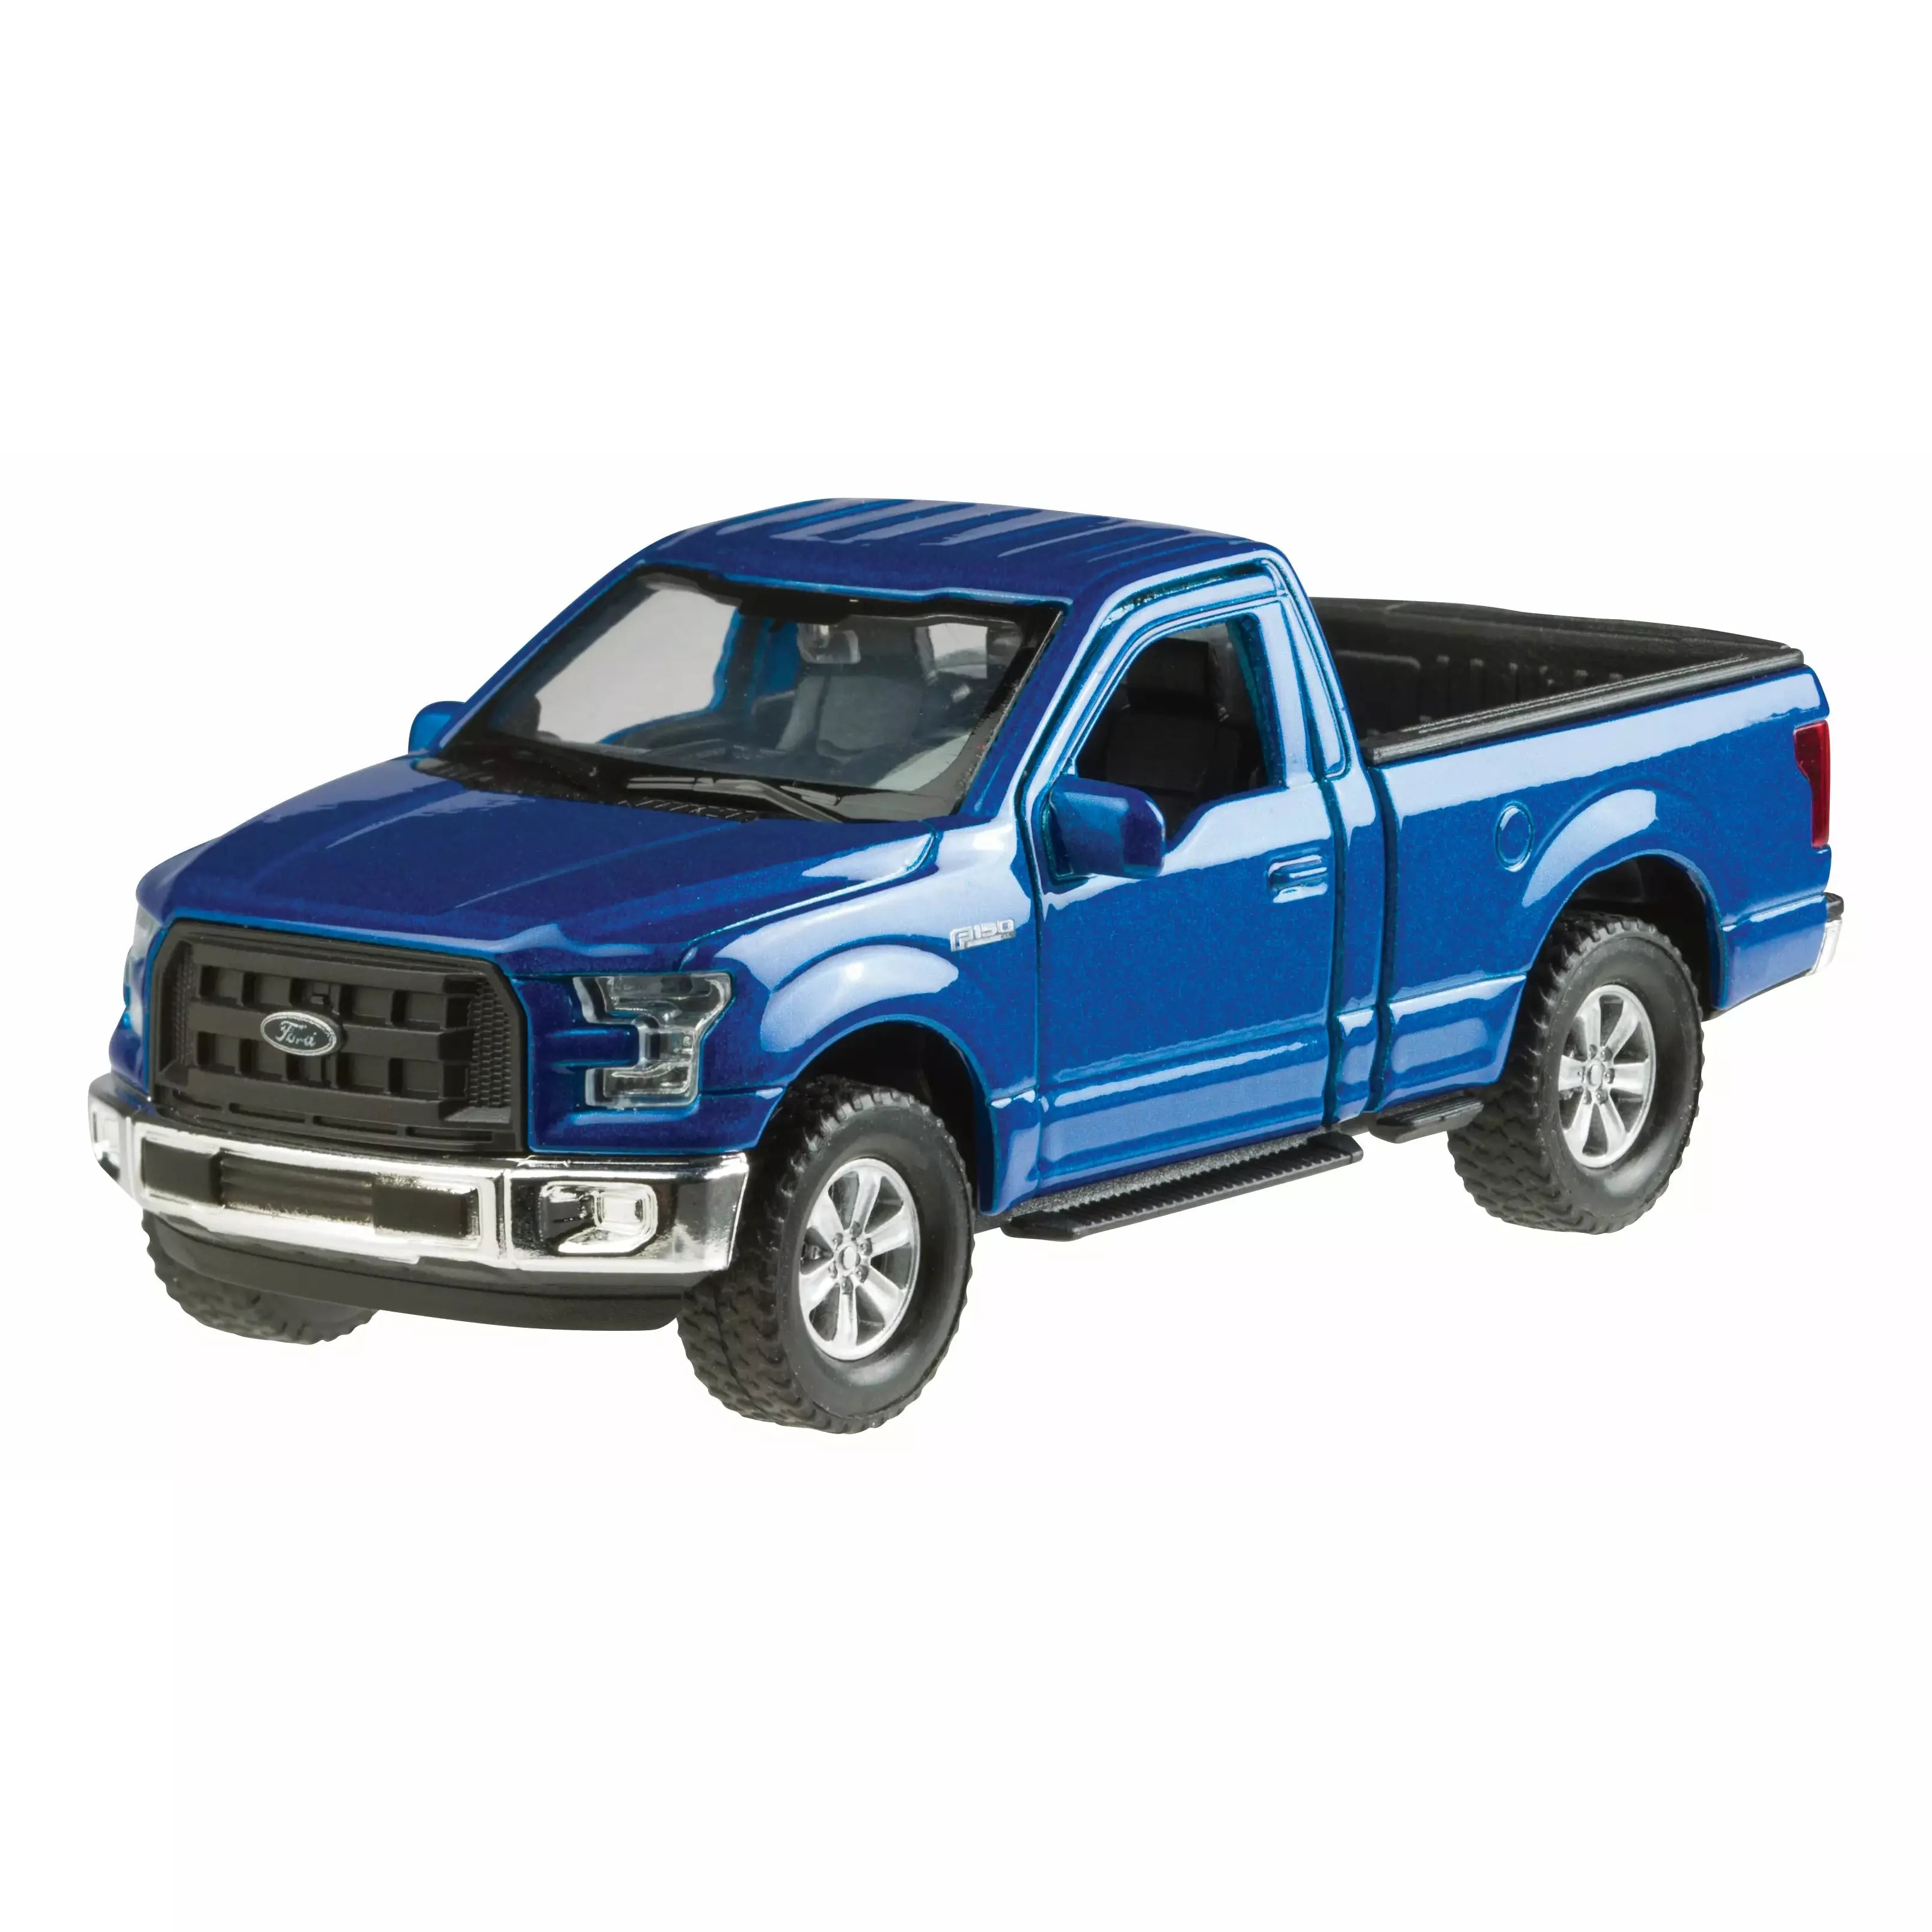 Ford F-150 Truck Toy Assorted Colors Pull Back Car - 0